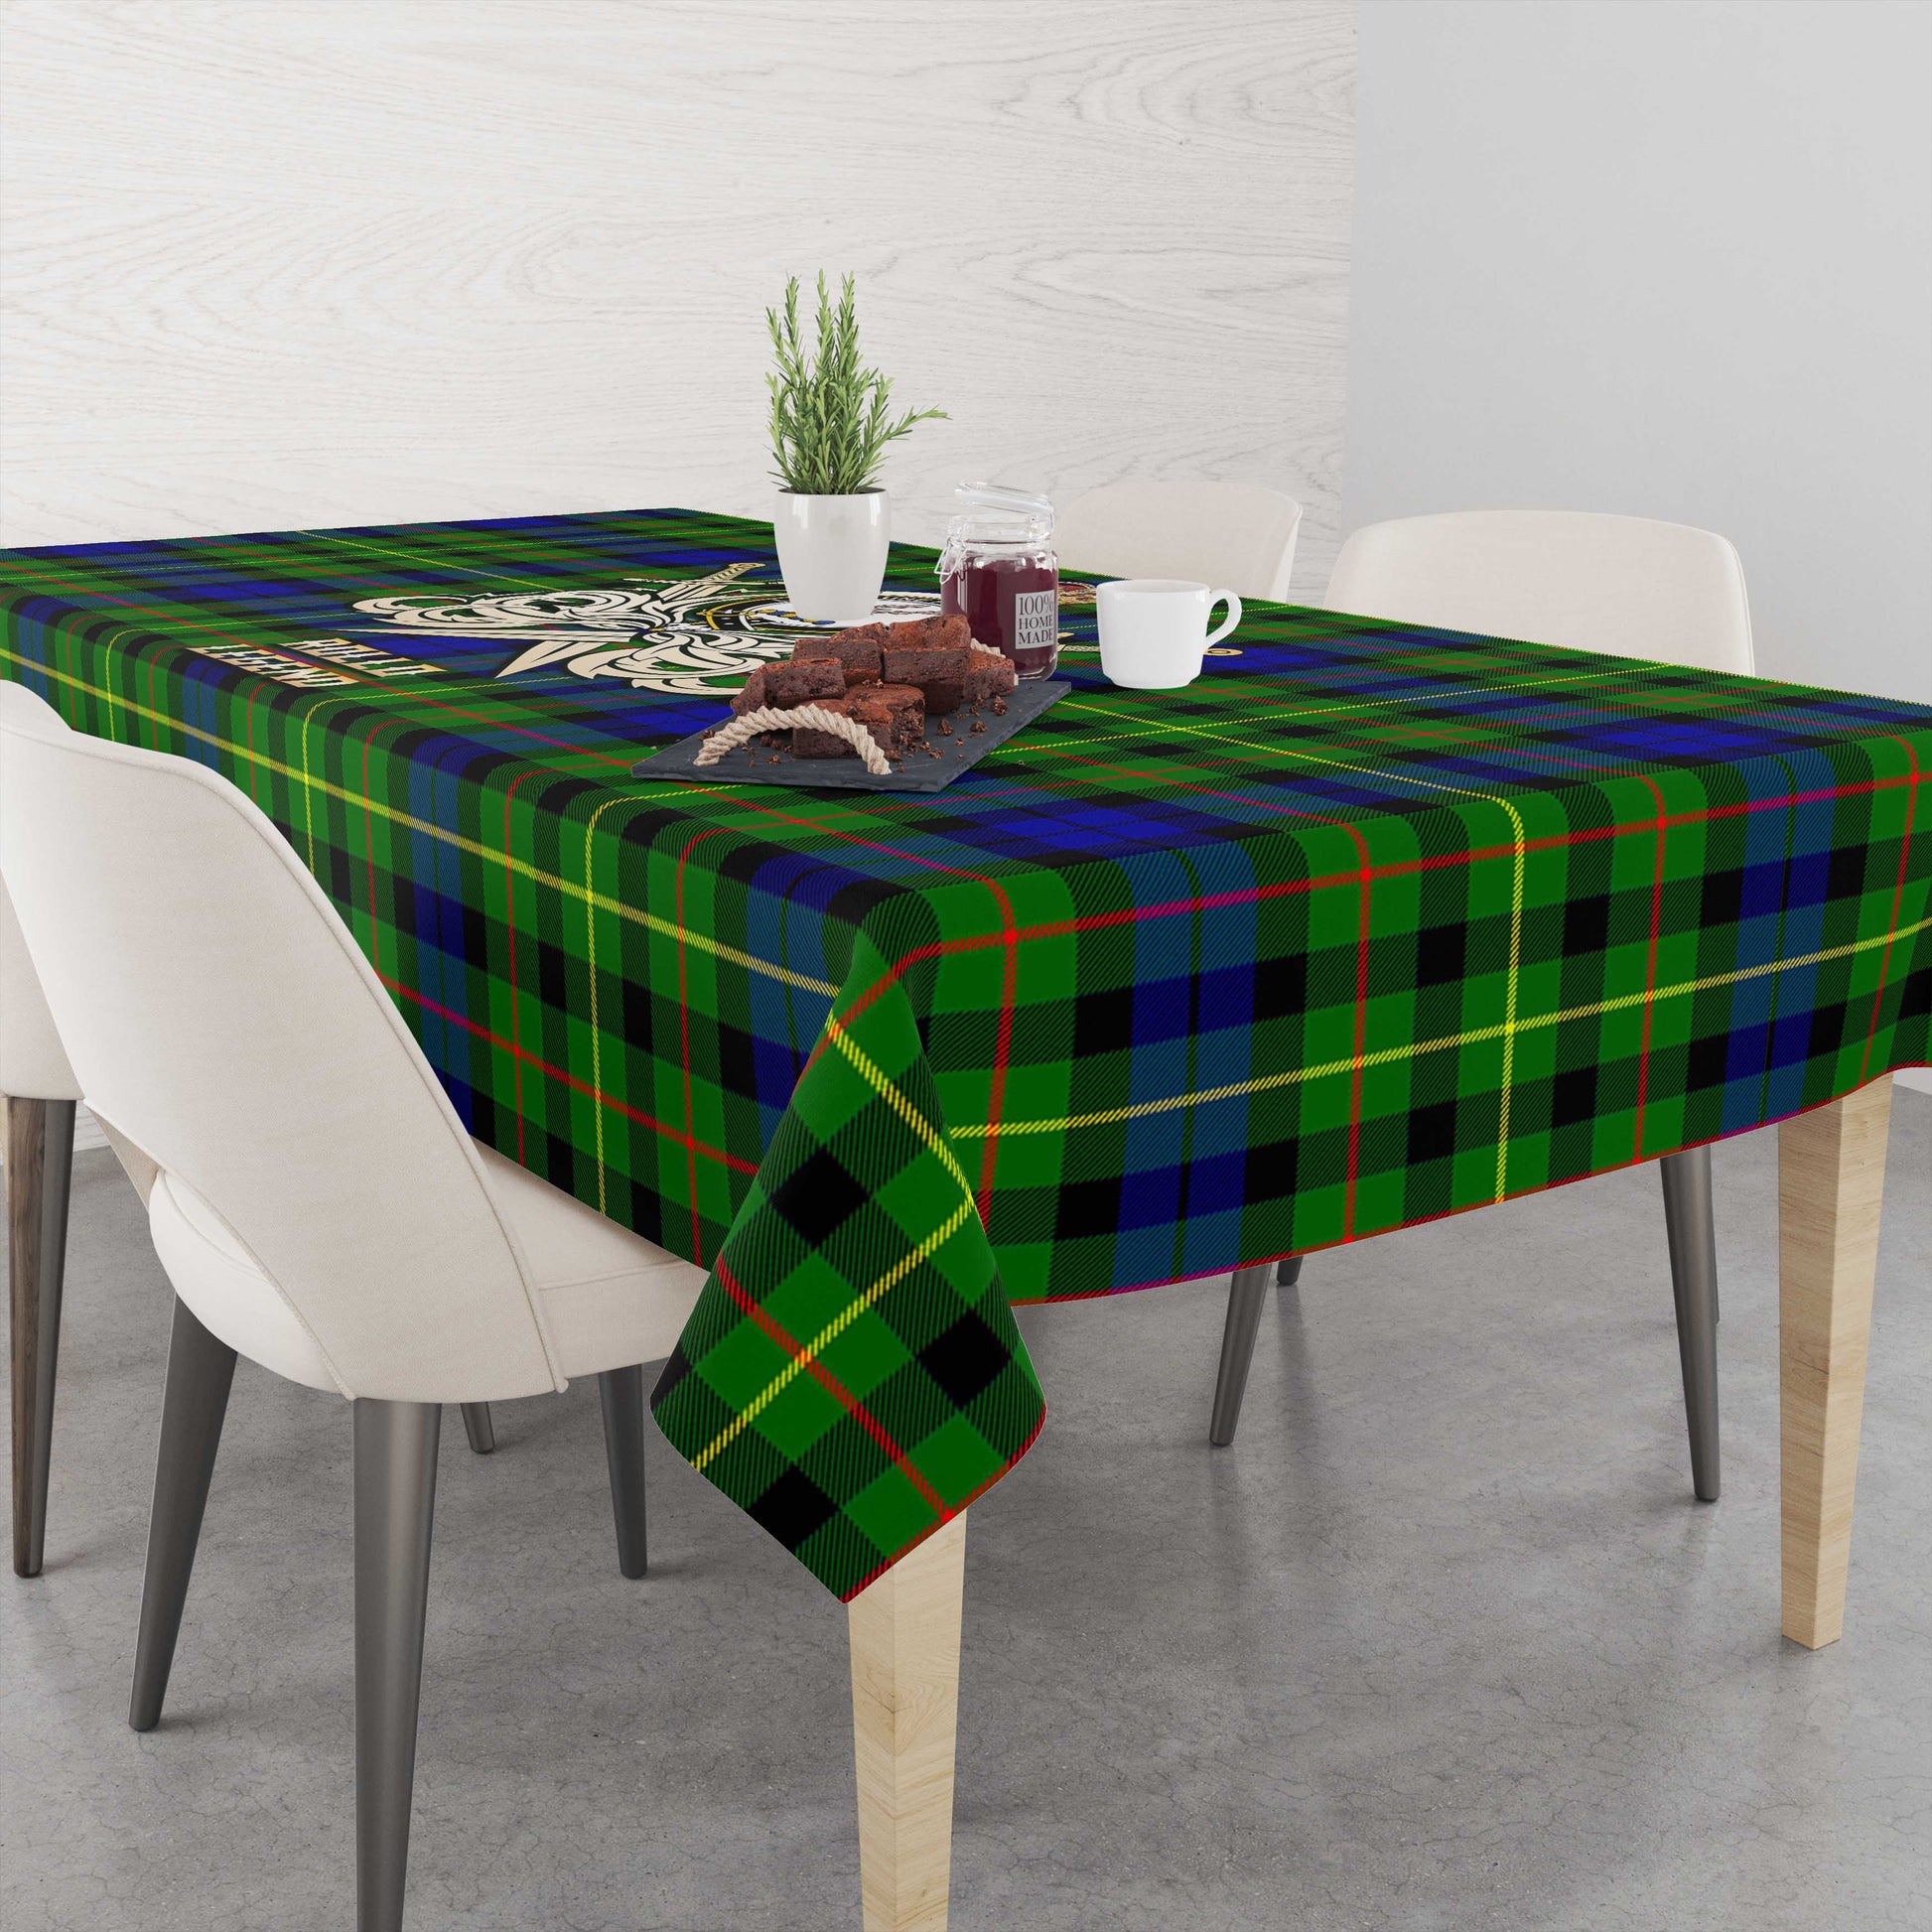 Tartan Vibes Clothing Rollo Modern Tartan Tablecloth with Clan Crest and the Golden Sword of Courageous Legacy